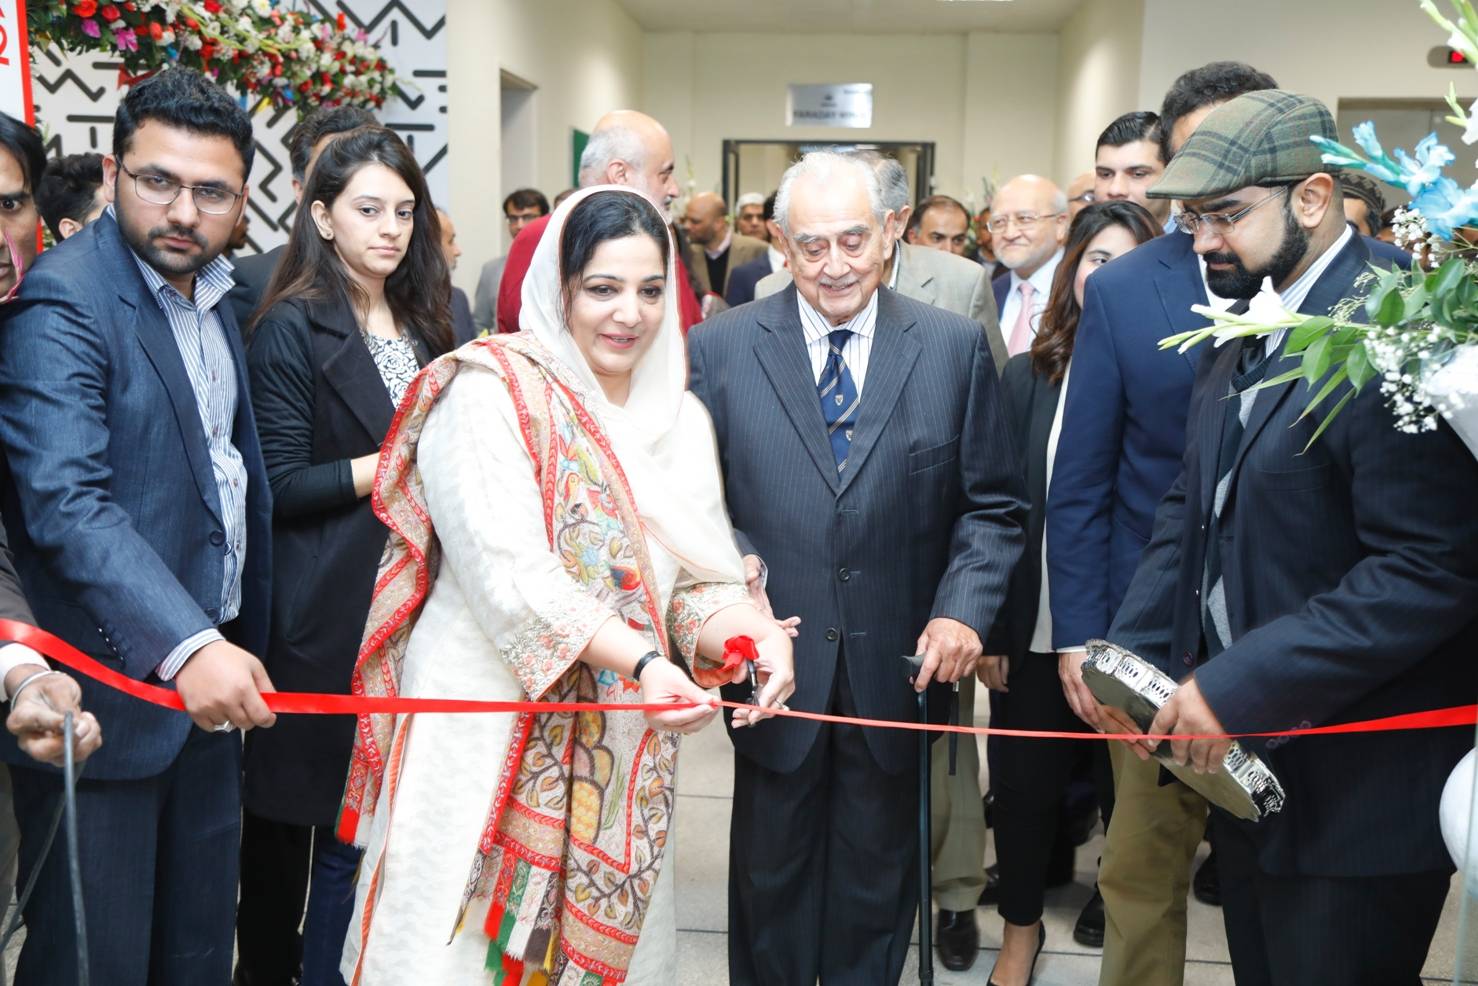 NATIONAL INCUBATION CENTER LAHORE INAUGURATED AT LUMS